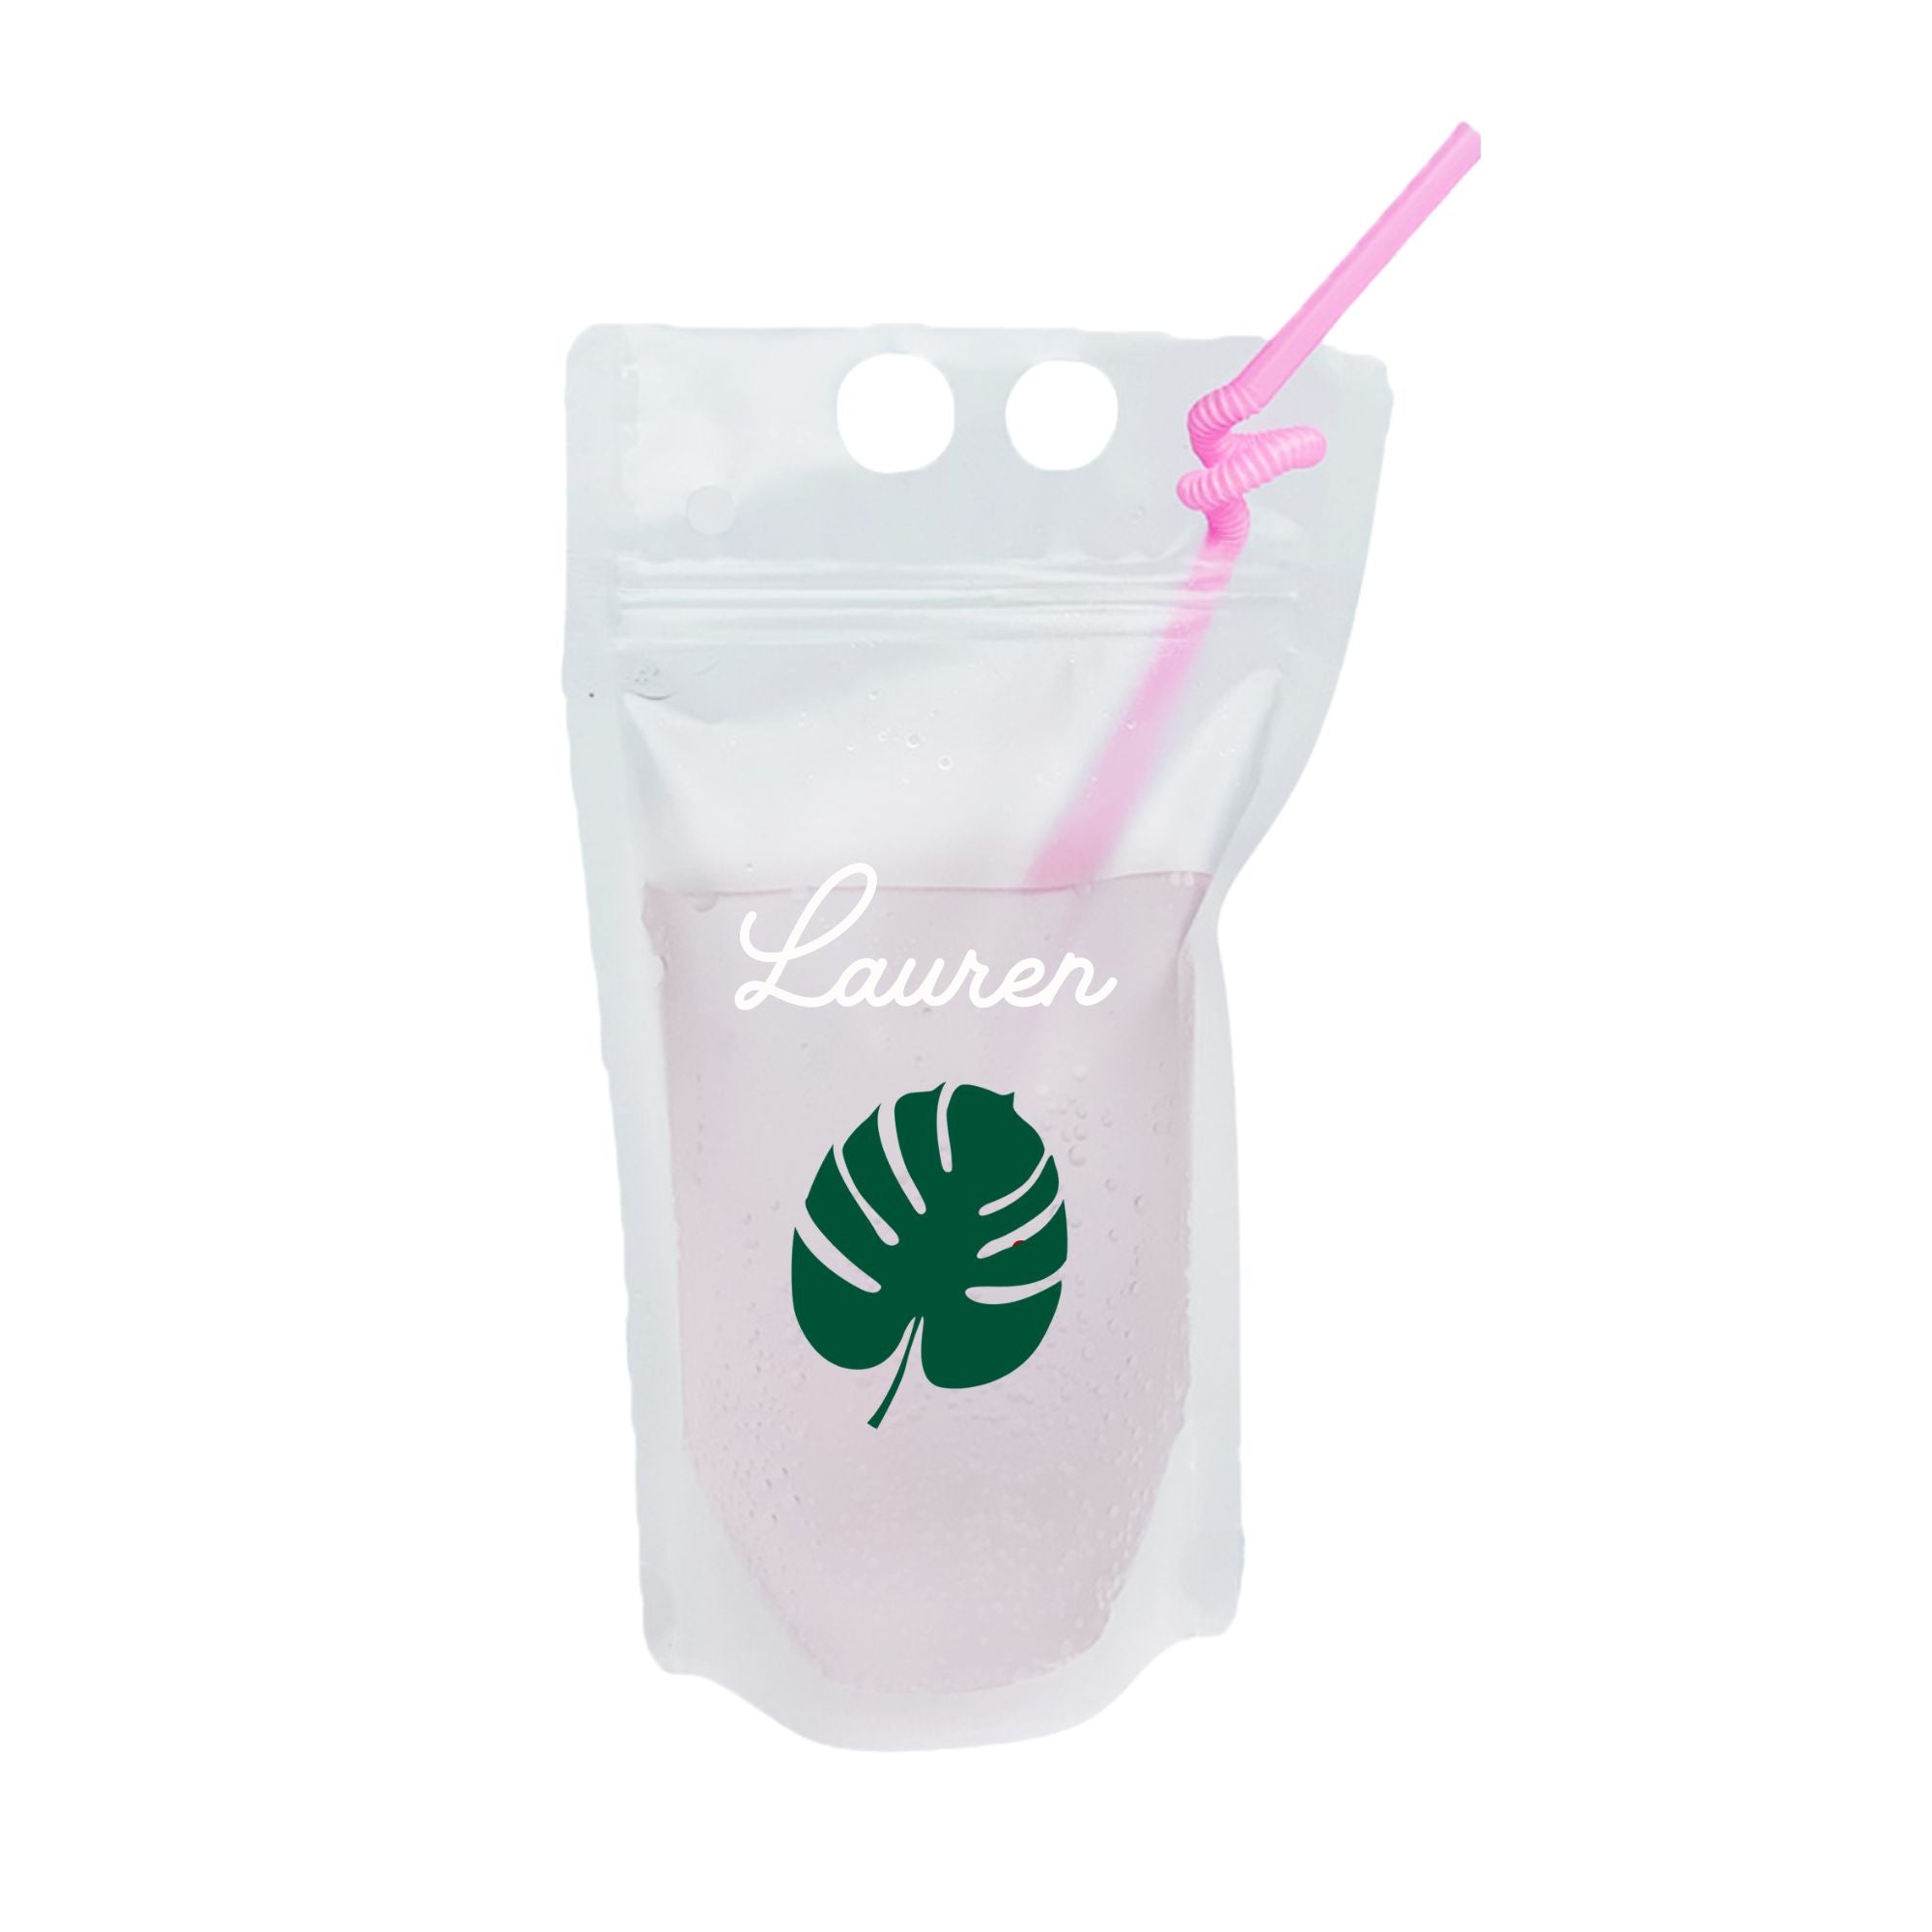 Tropical Leaf Party Pouch - Sprinkled With Pink #bachelorette #custom #gifts